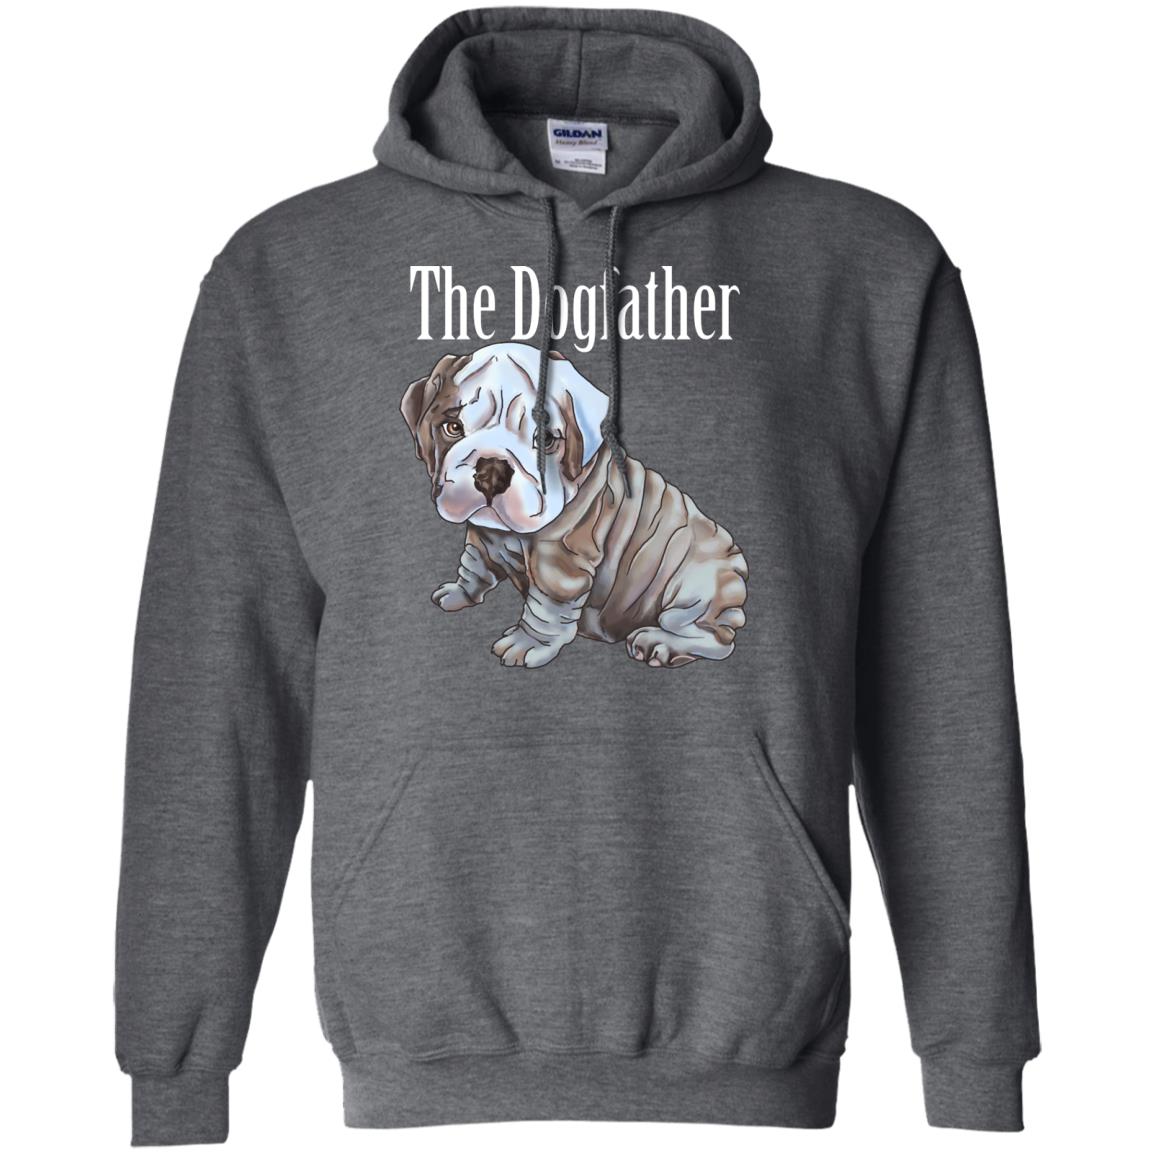 English bulldog Hoodie For Men - The Dogfather - GoneBold.gift